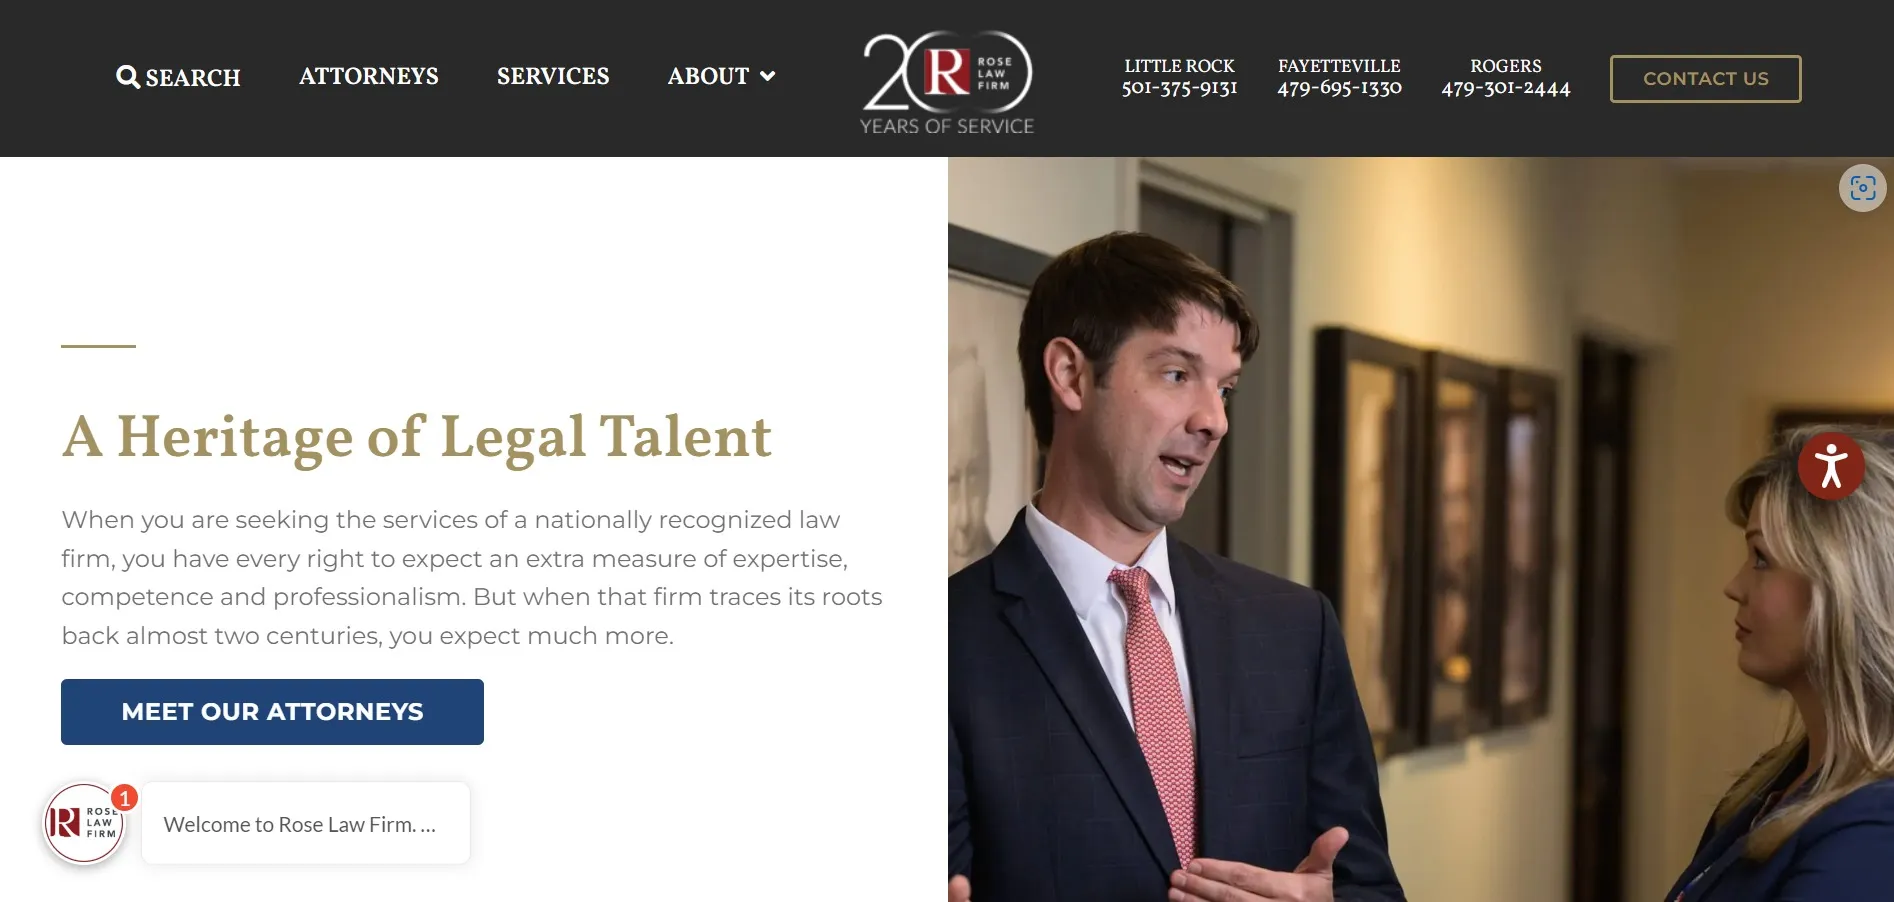 Review on The Rose Law Firm